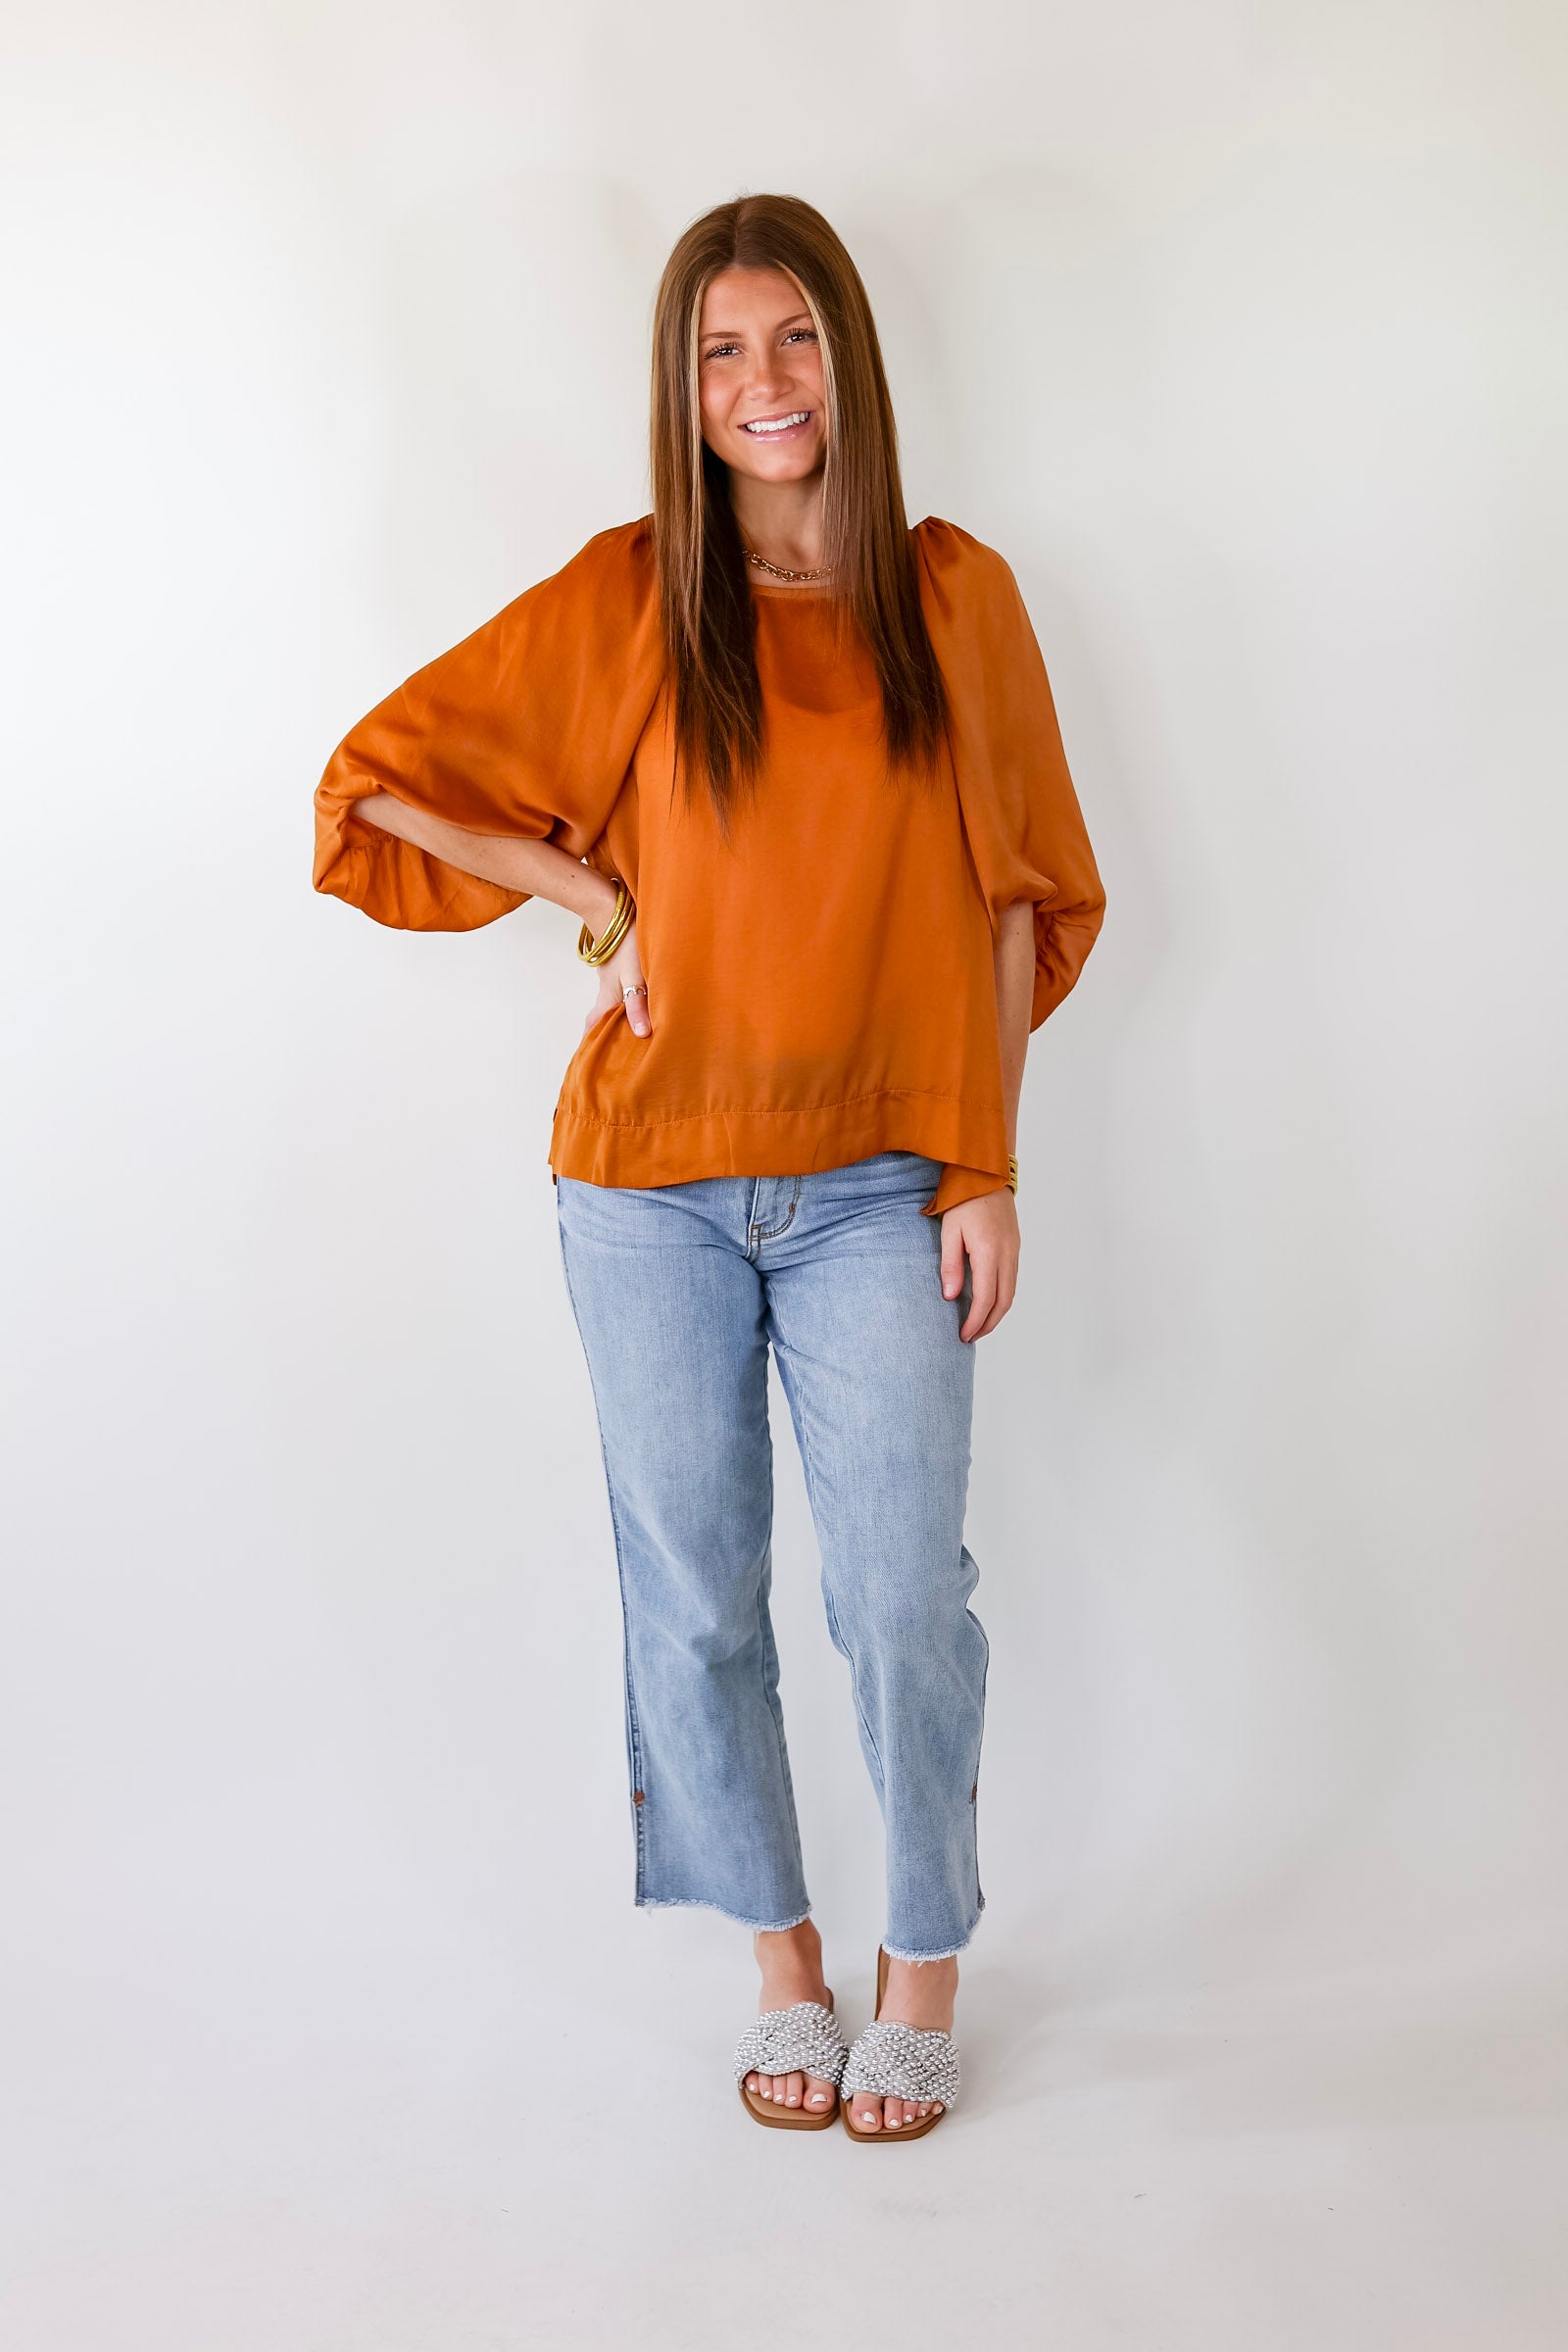 Flash A Smile Half Balloon Sleeve Satin Blouse in Burnt Orange - Giddy Up Glamour Boutique